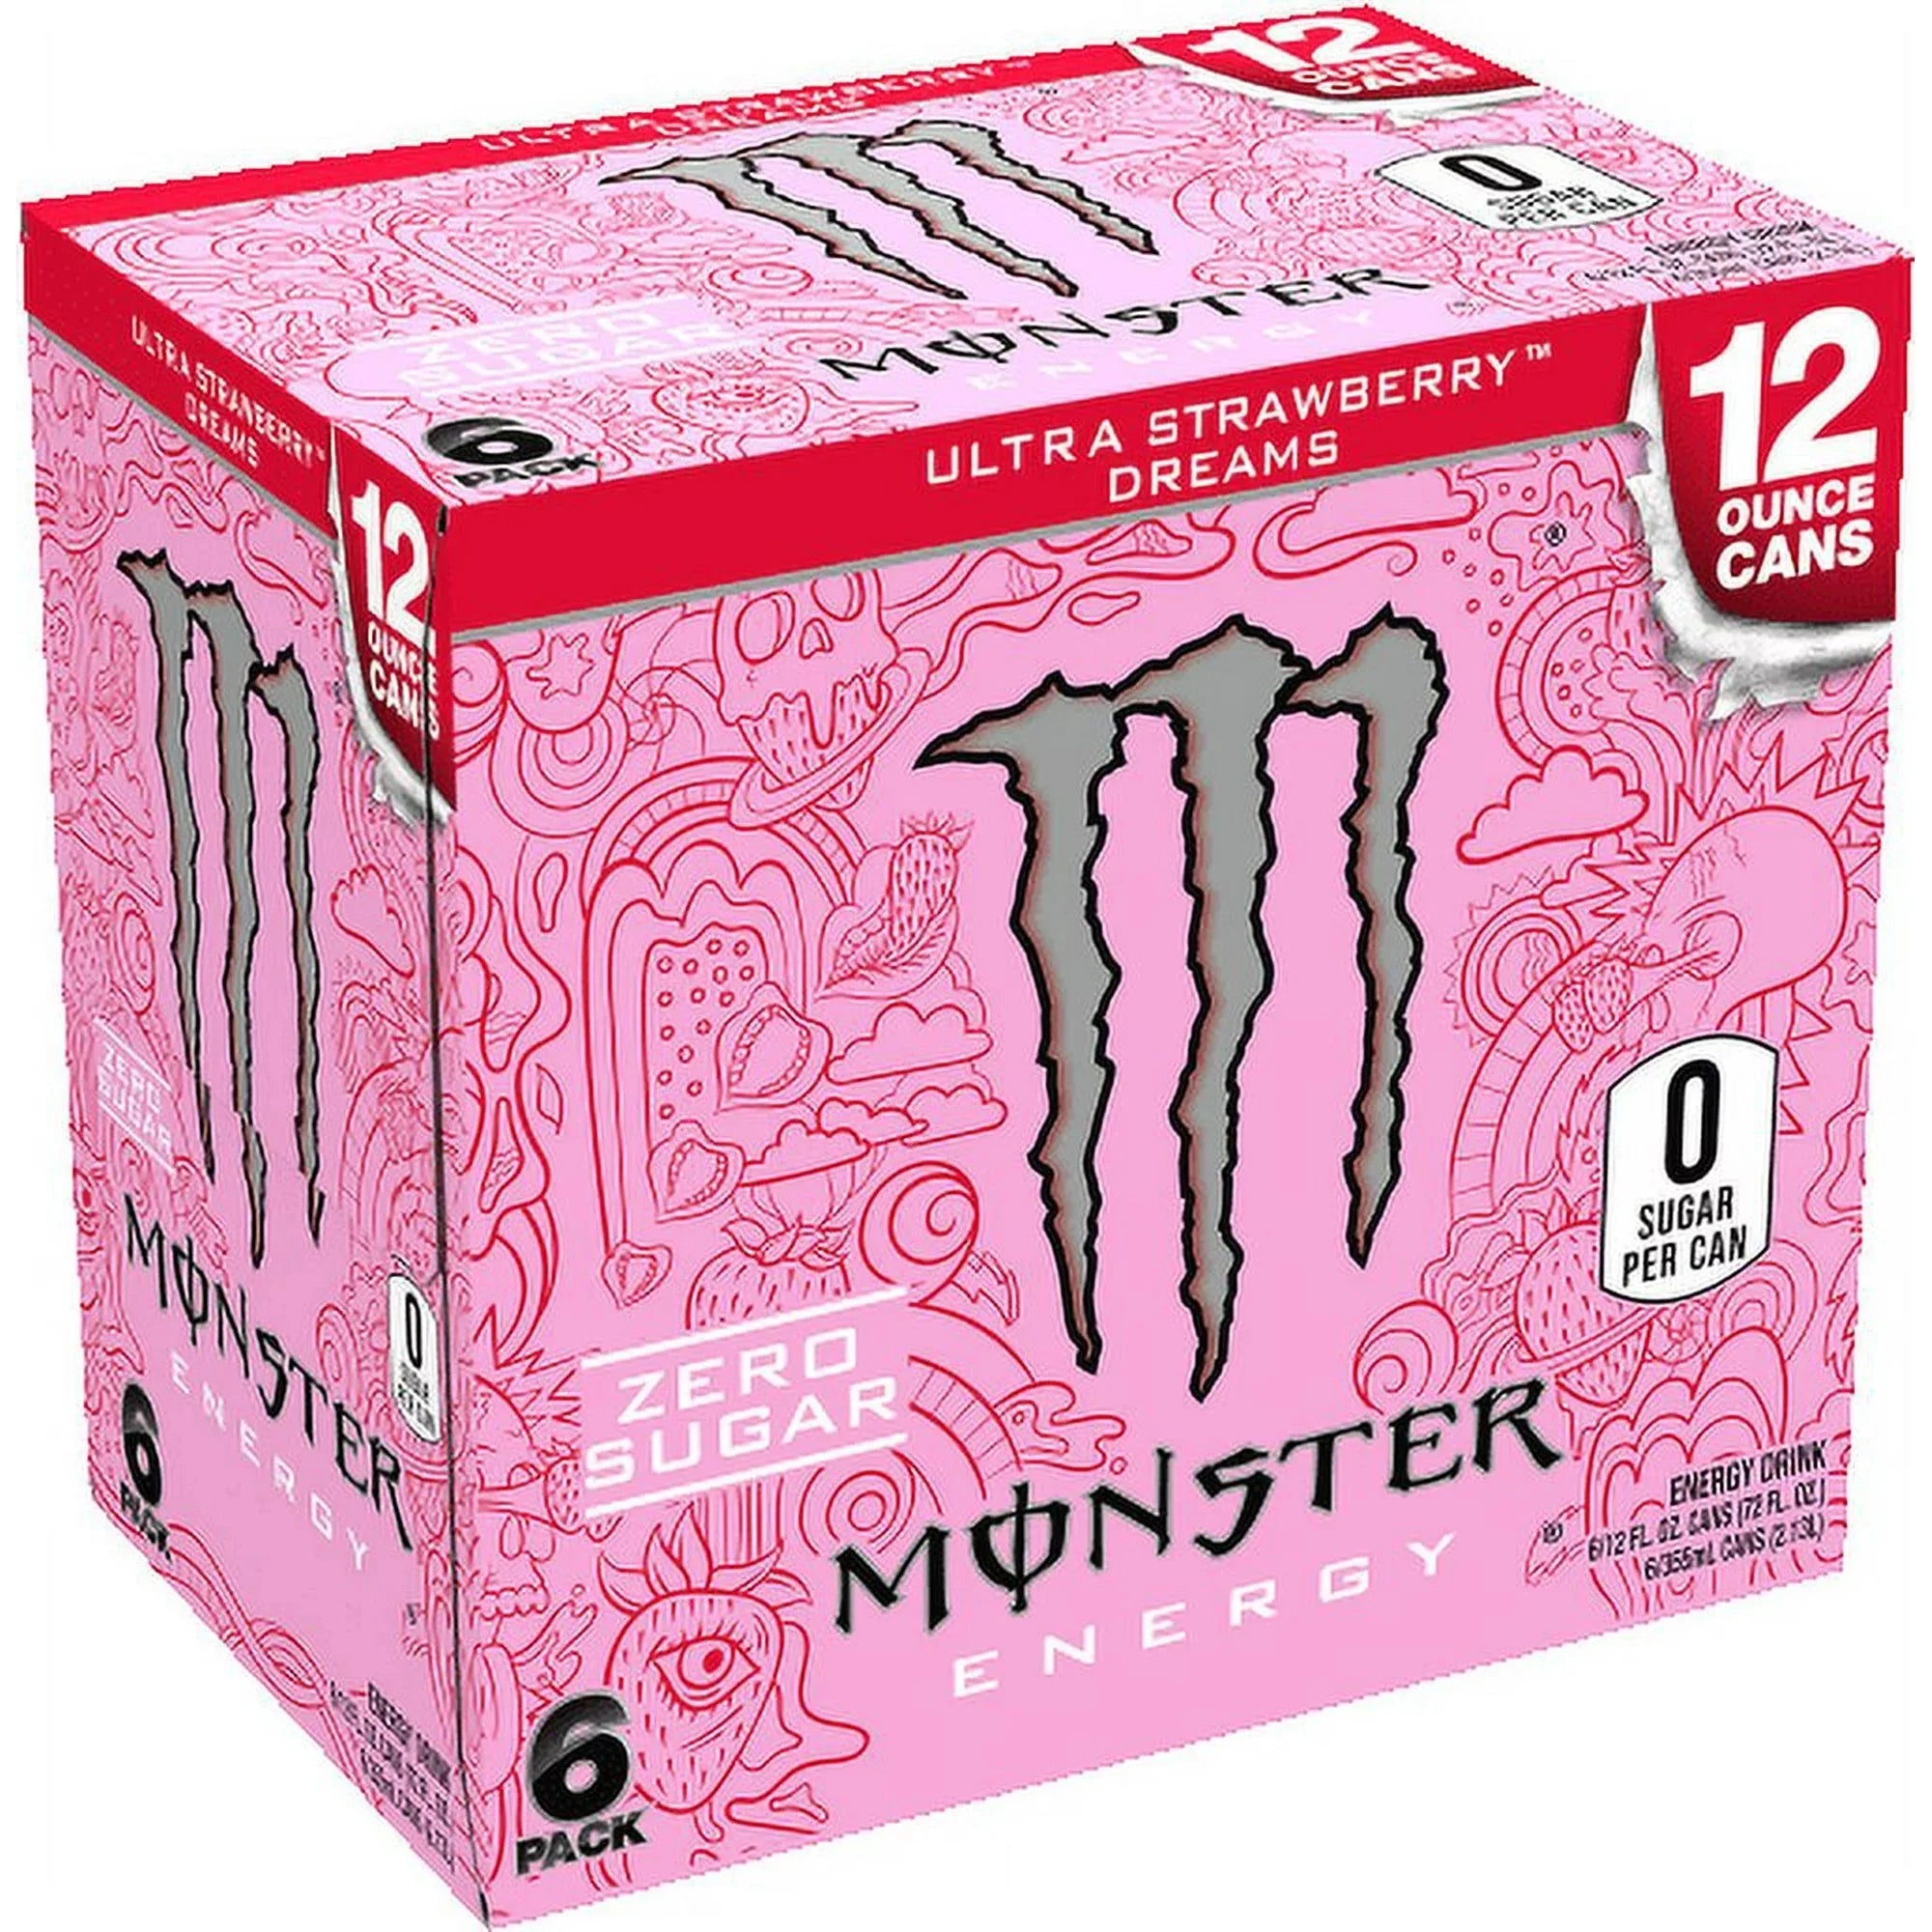 Wholesale prices with free shipping all over United States Monster Ultra Strawberry Dreams, Sugar Free Energy Drink, 12 fl oz, 6 Pack - Steven Deals